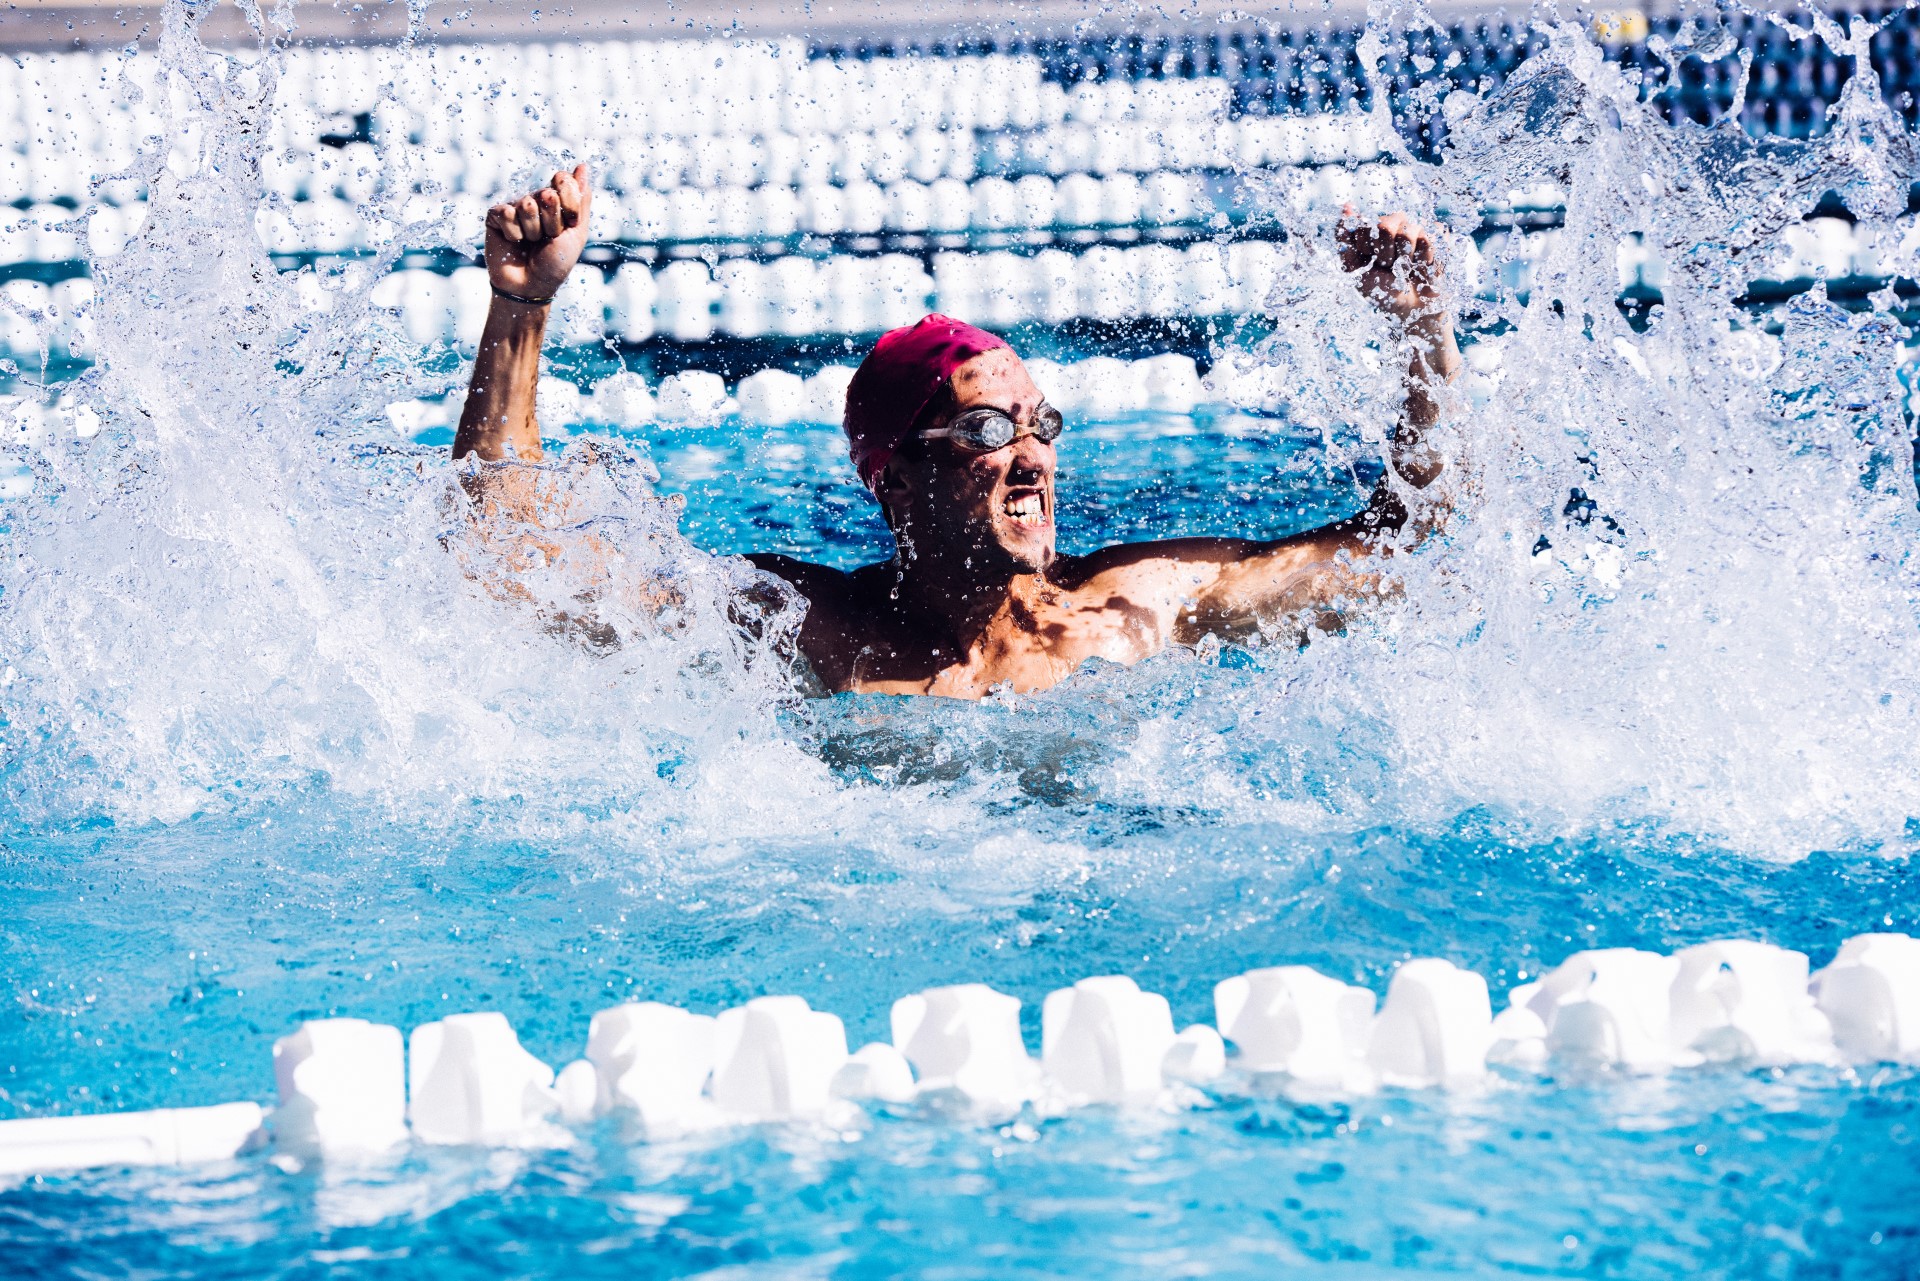 A swimmer in the pool celebrating | Featured image for the Gym Exercises for Swimmers blog from Pivotal Motion Physiotherapy.